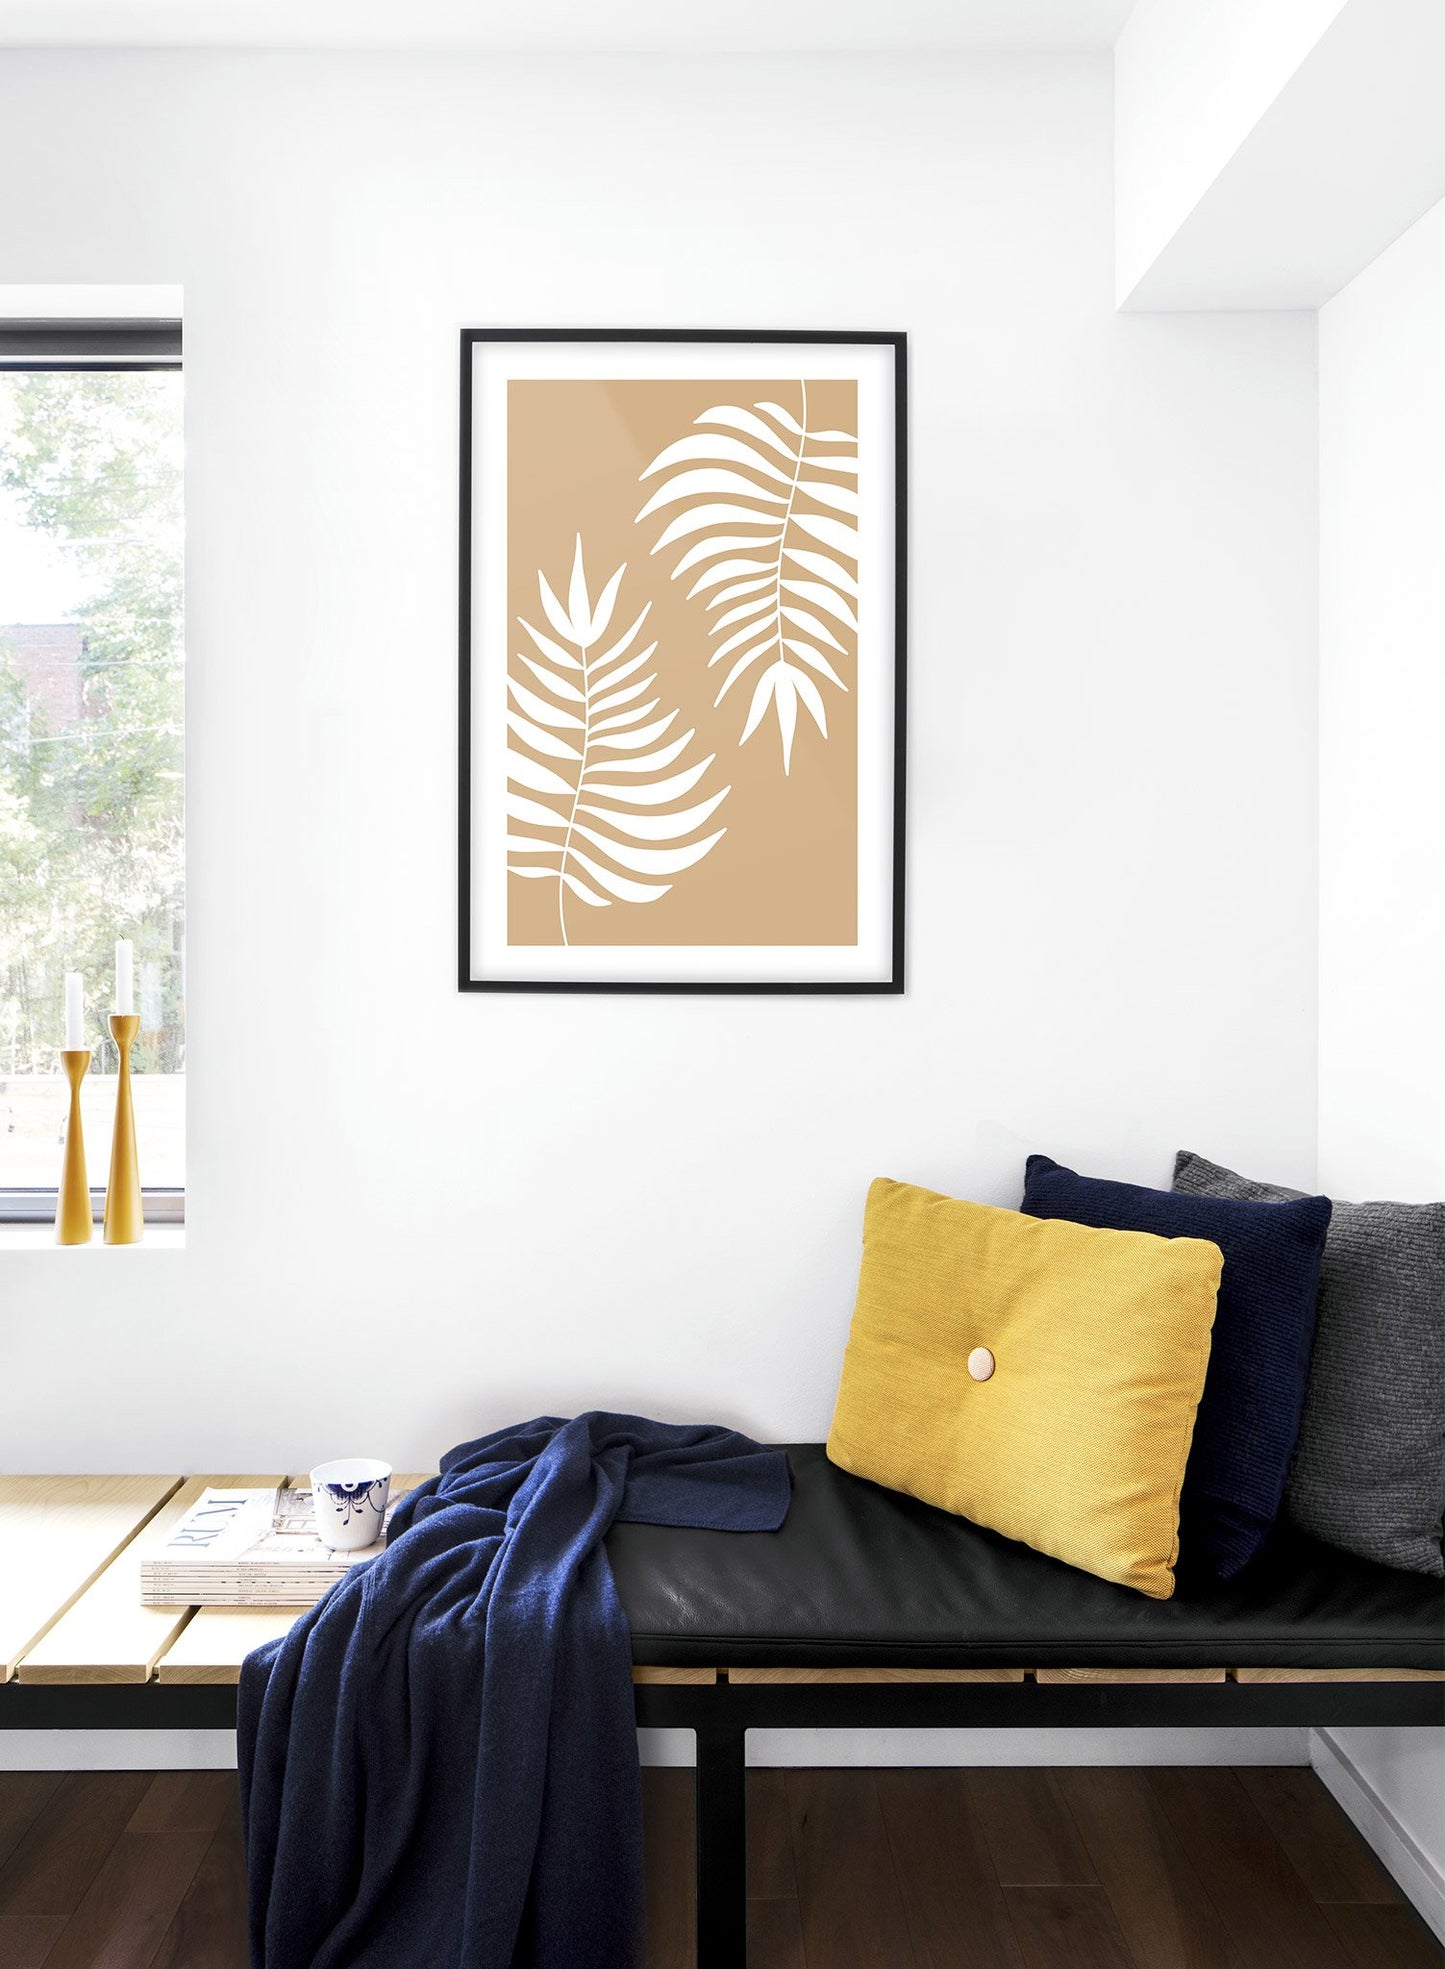 Modern minimalist illustration poster by Opposite Wall with leaves in beige - Lifestyle - Bedroom